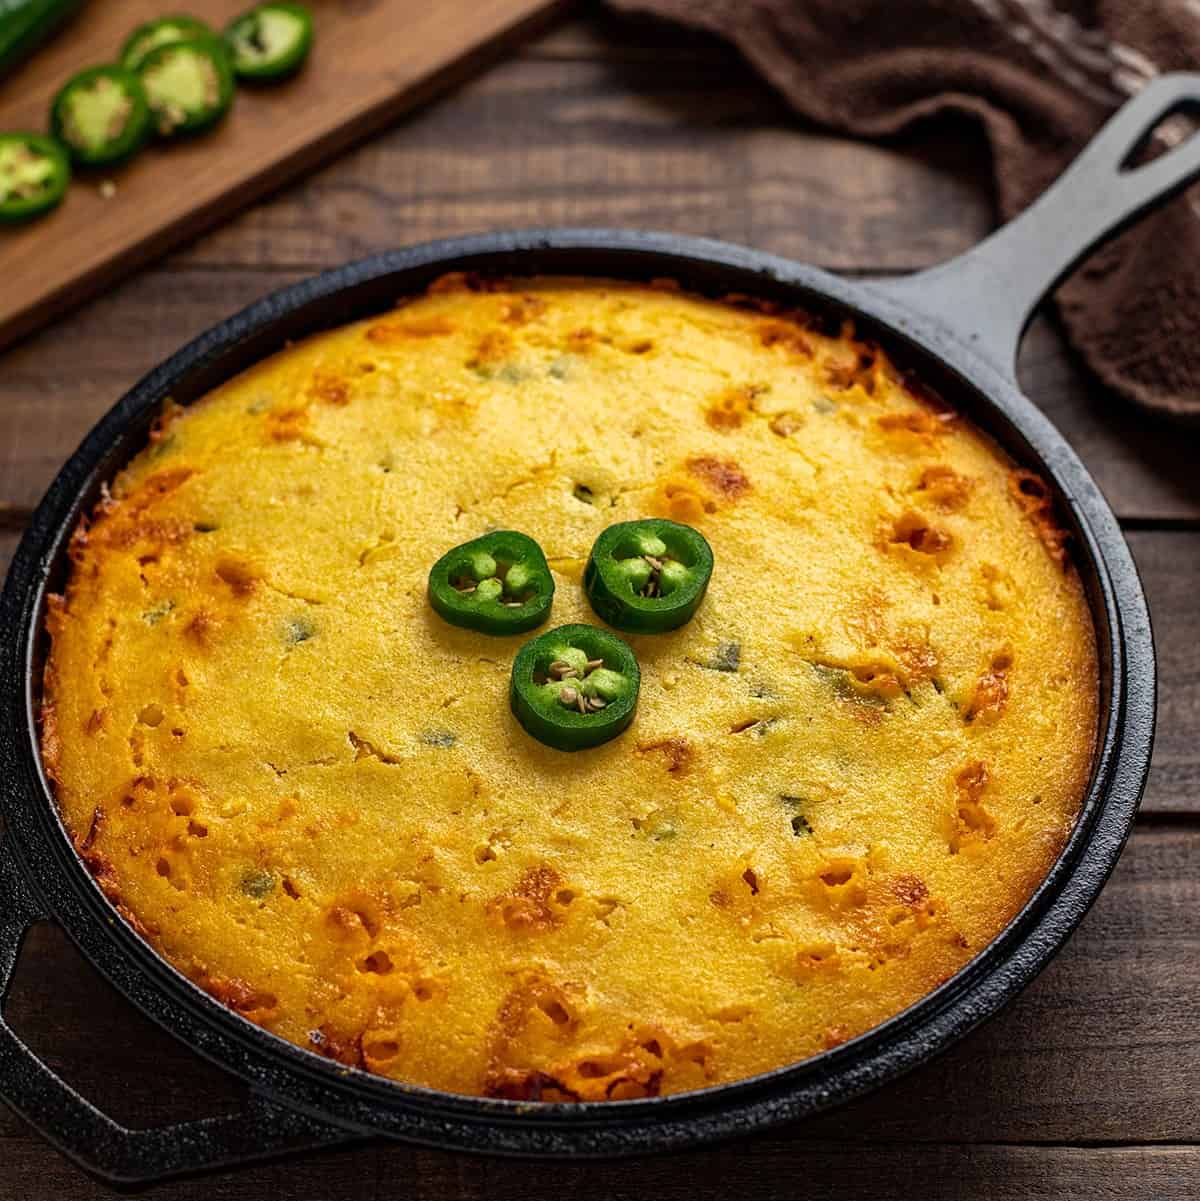 baked jalapeno cornbread in cast iron skillet with 3 jalapeno slices on top